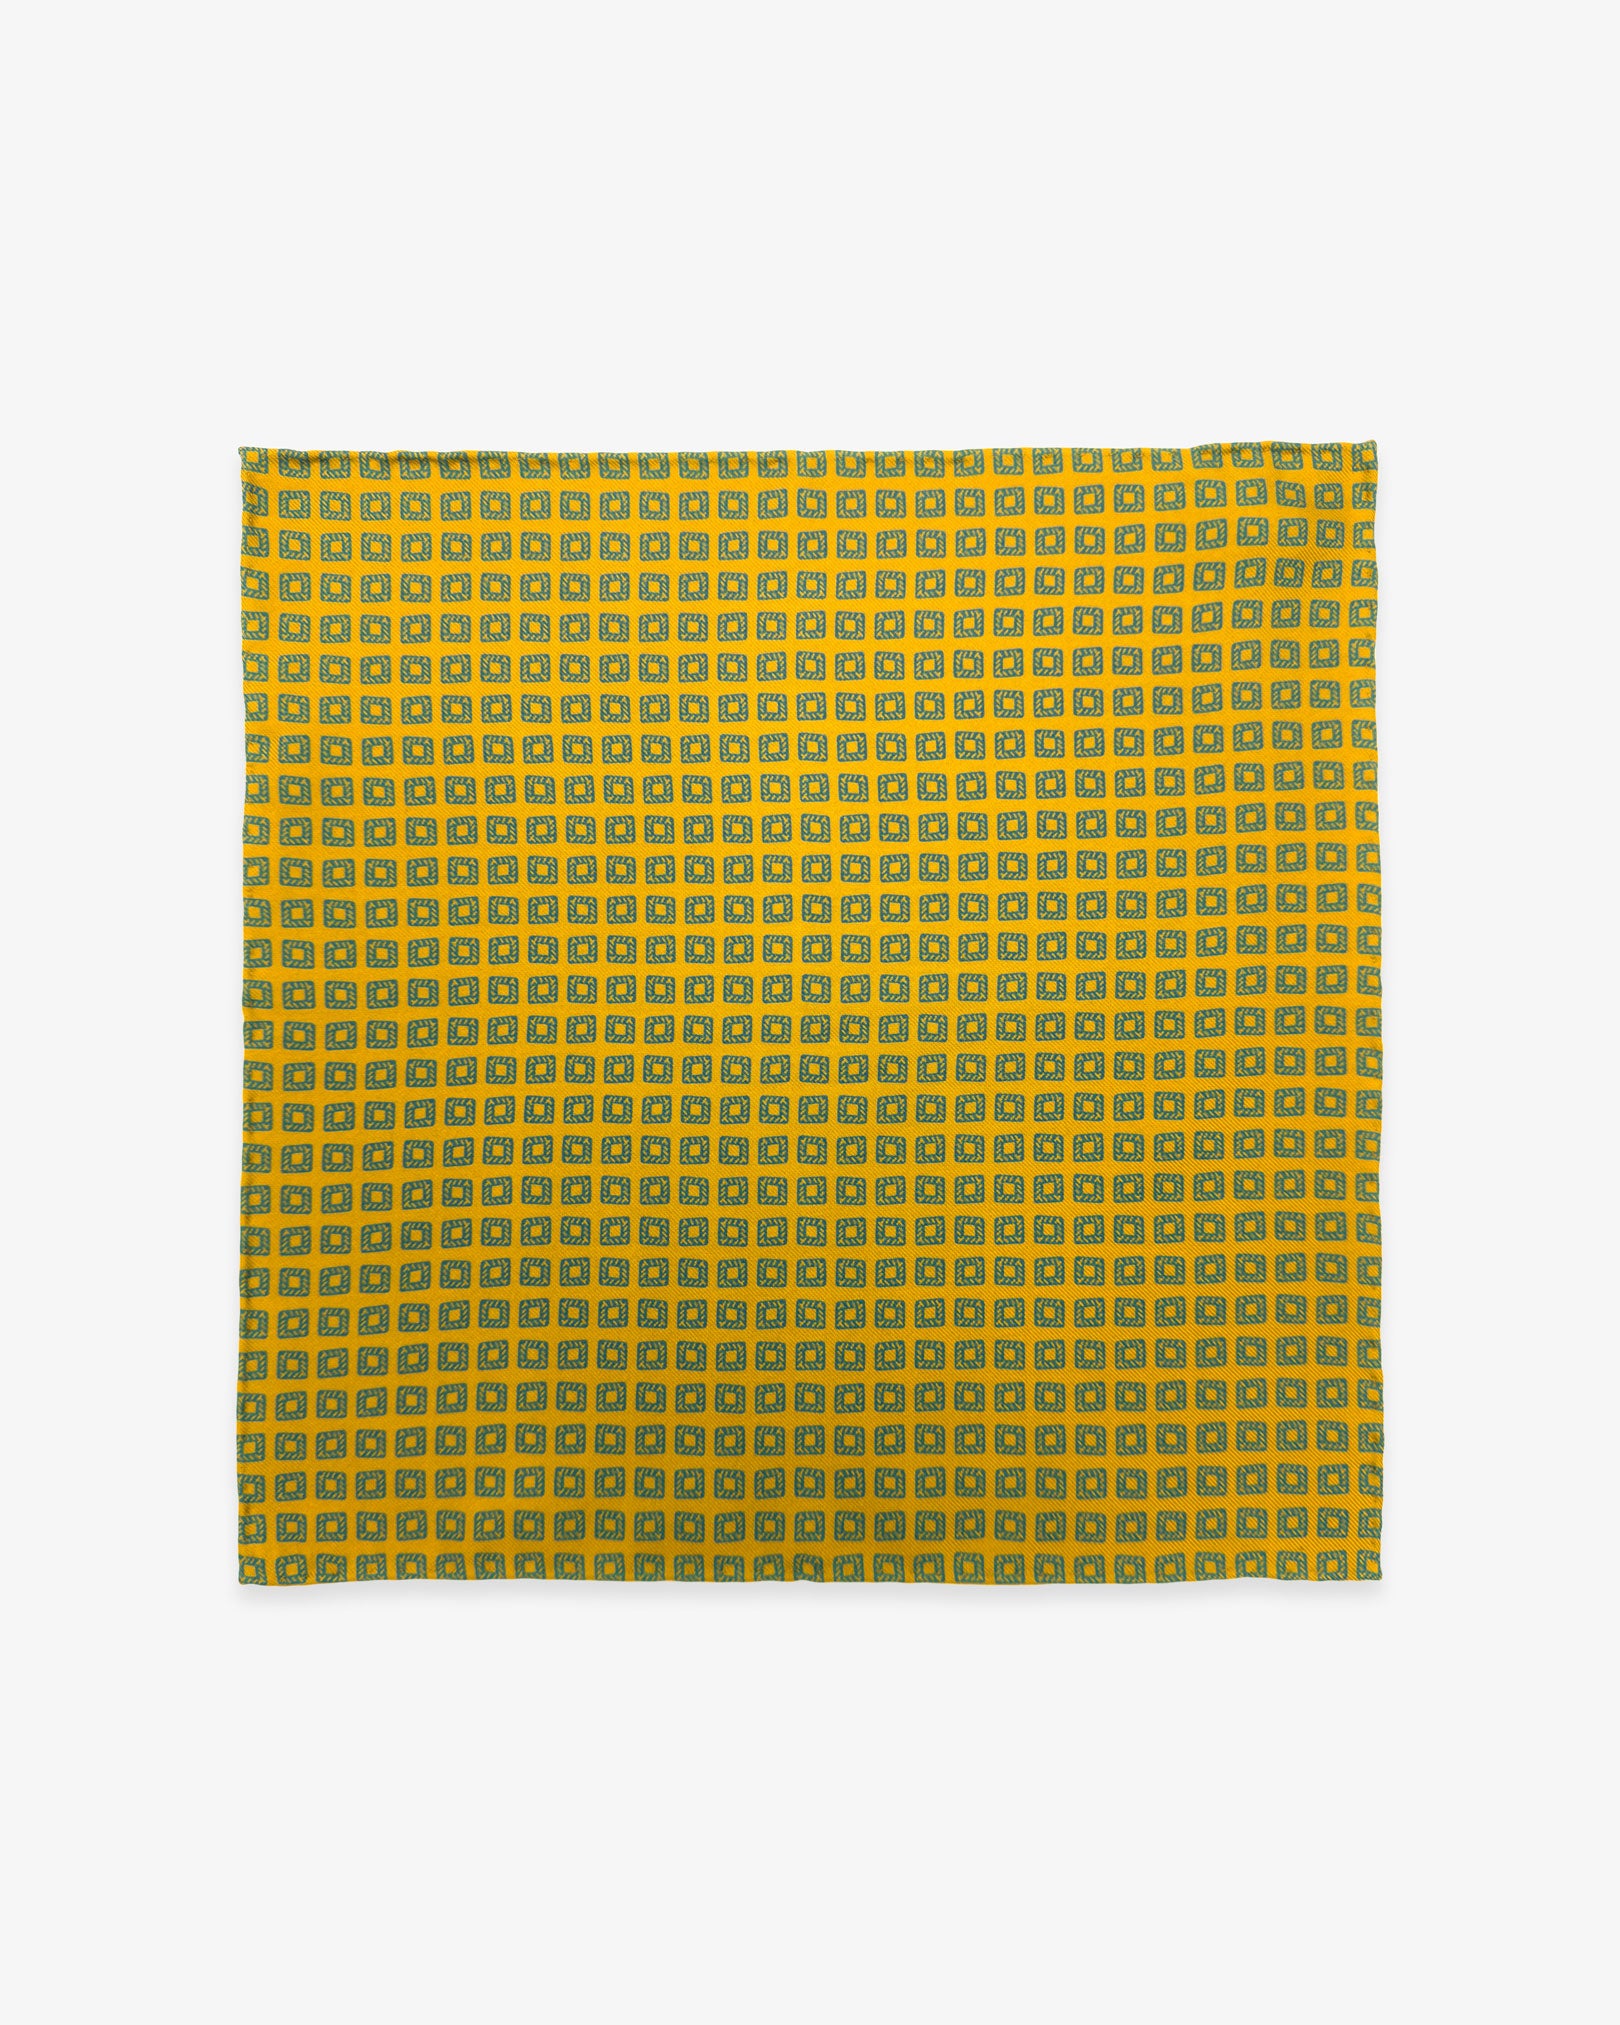 Fully unfolded 'Dover' English silk pocket square, showing the neat rows of blue squares against a golden-yellow background.